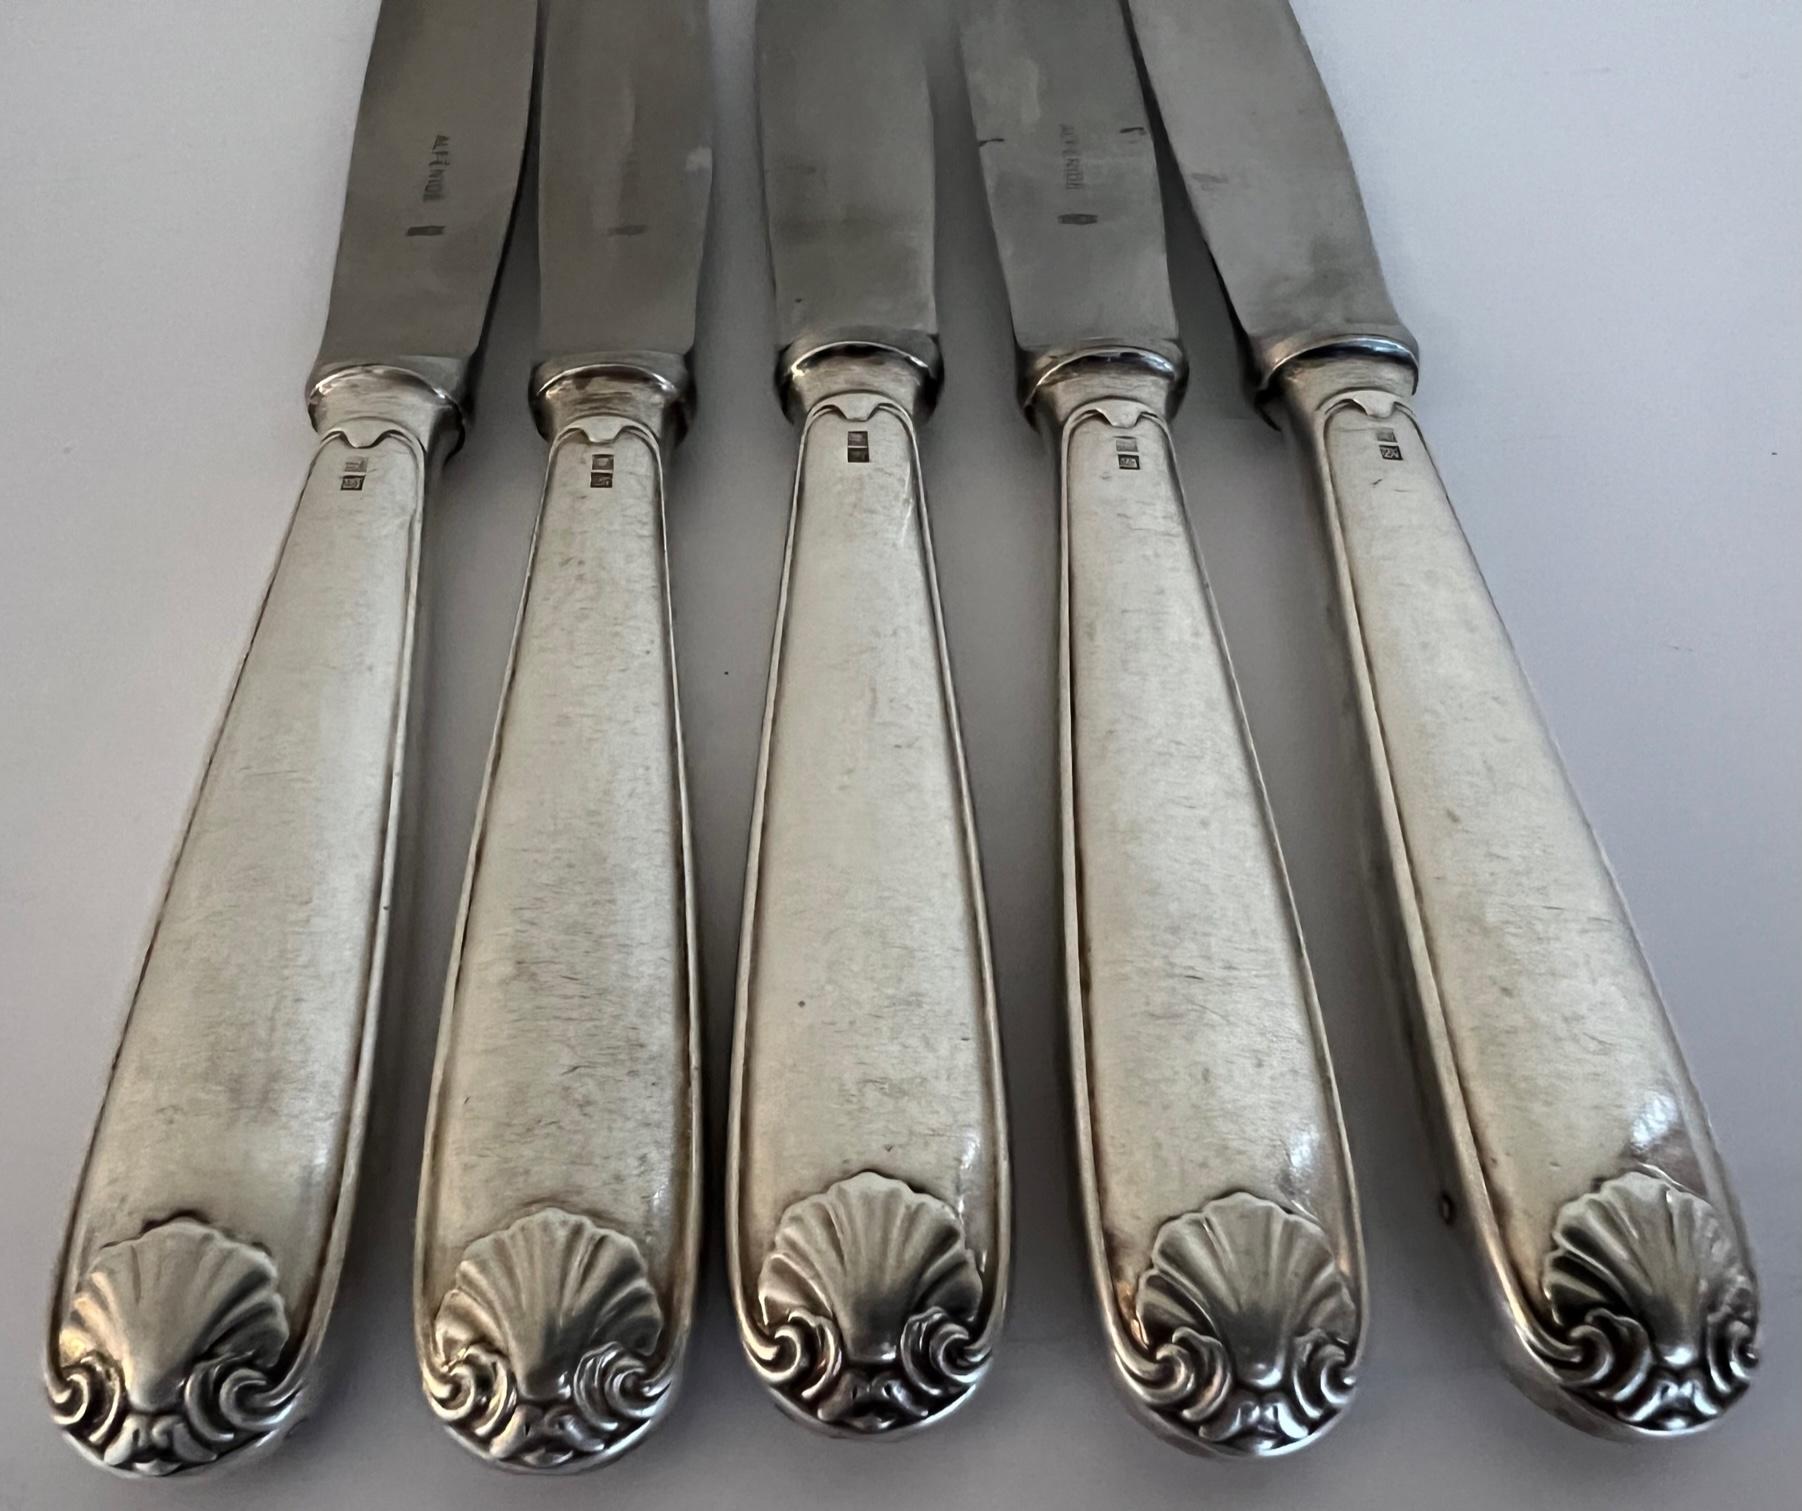 European French Silverplated Knives by Christofle -Set of 5